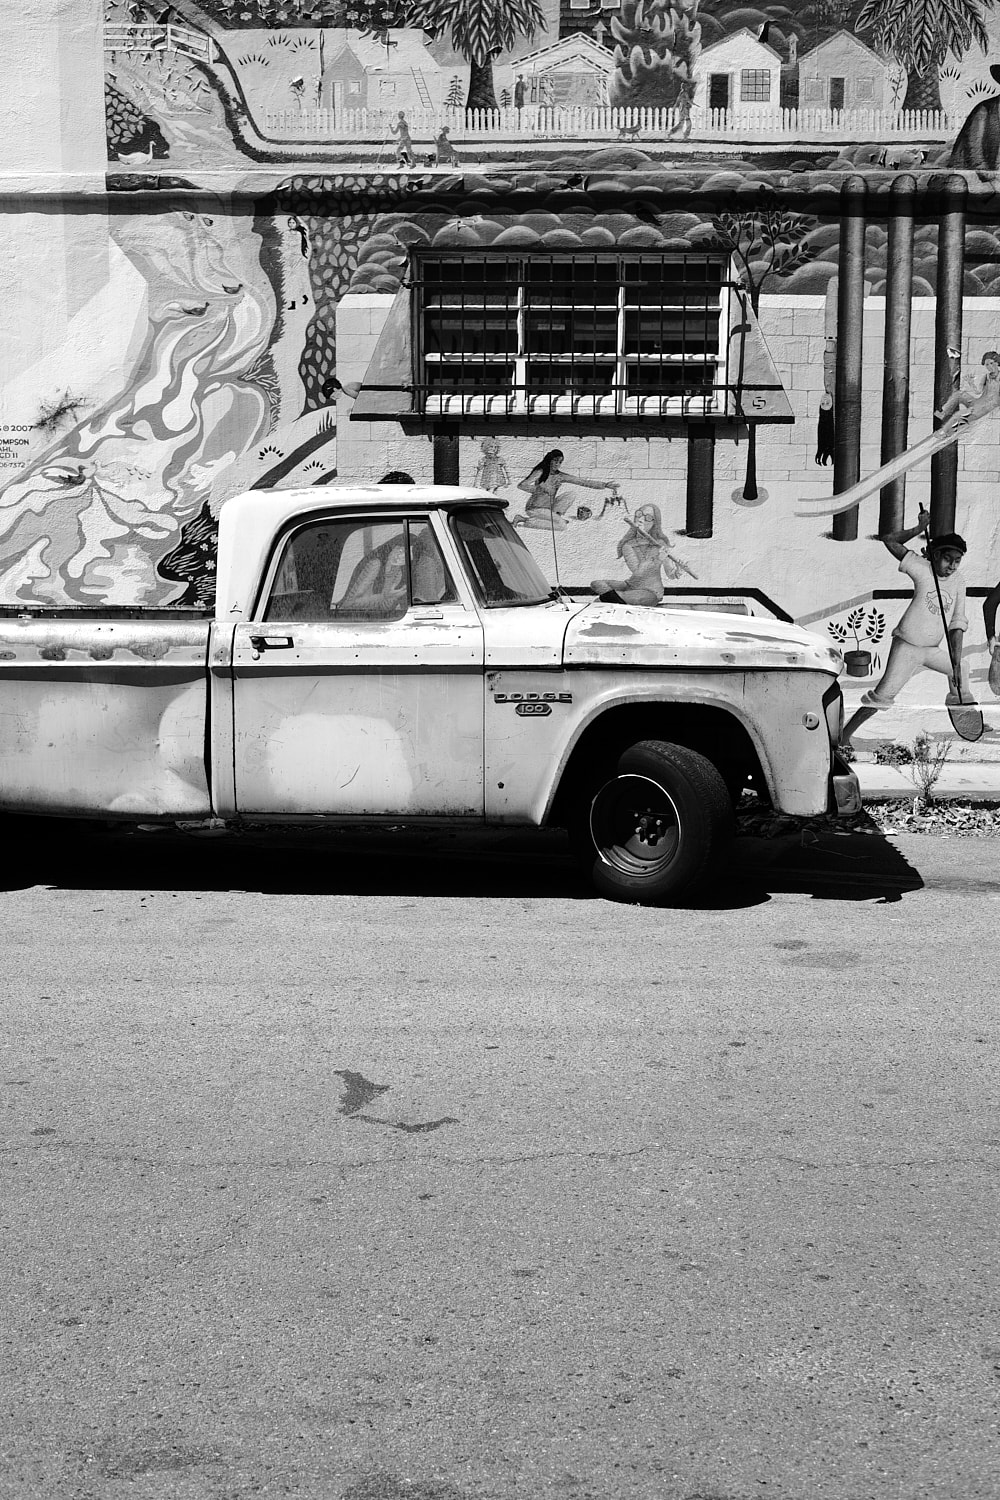 Black and white portrait photo of a 1960-70's beat up Dodge pickup truck parked in front of a wall mural with iron bars over a window.